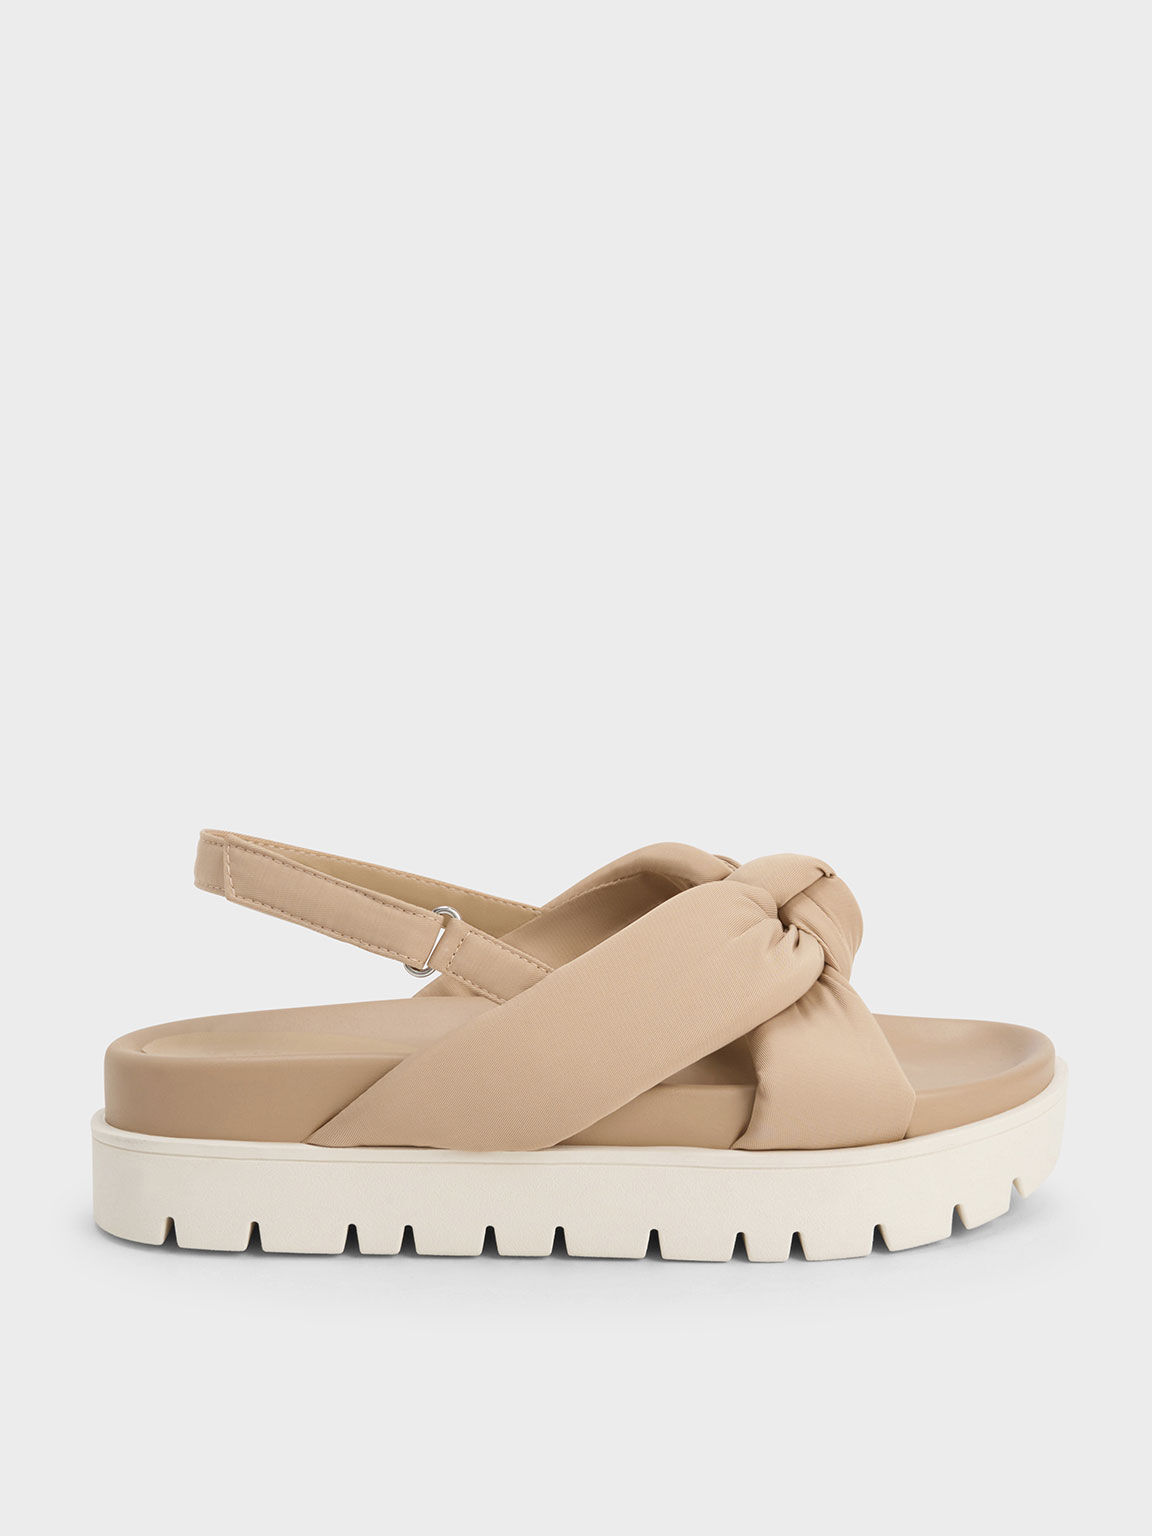 Nude Nylon Knotted Flatform Sandals Charles And Keith Nz 